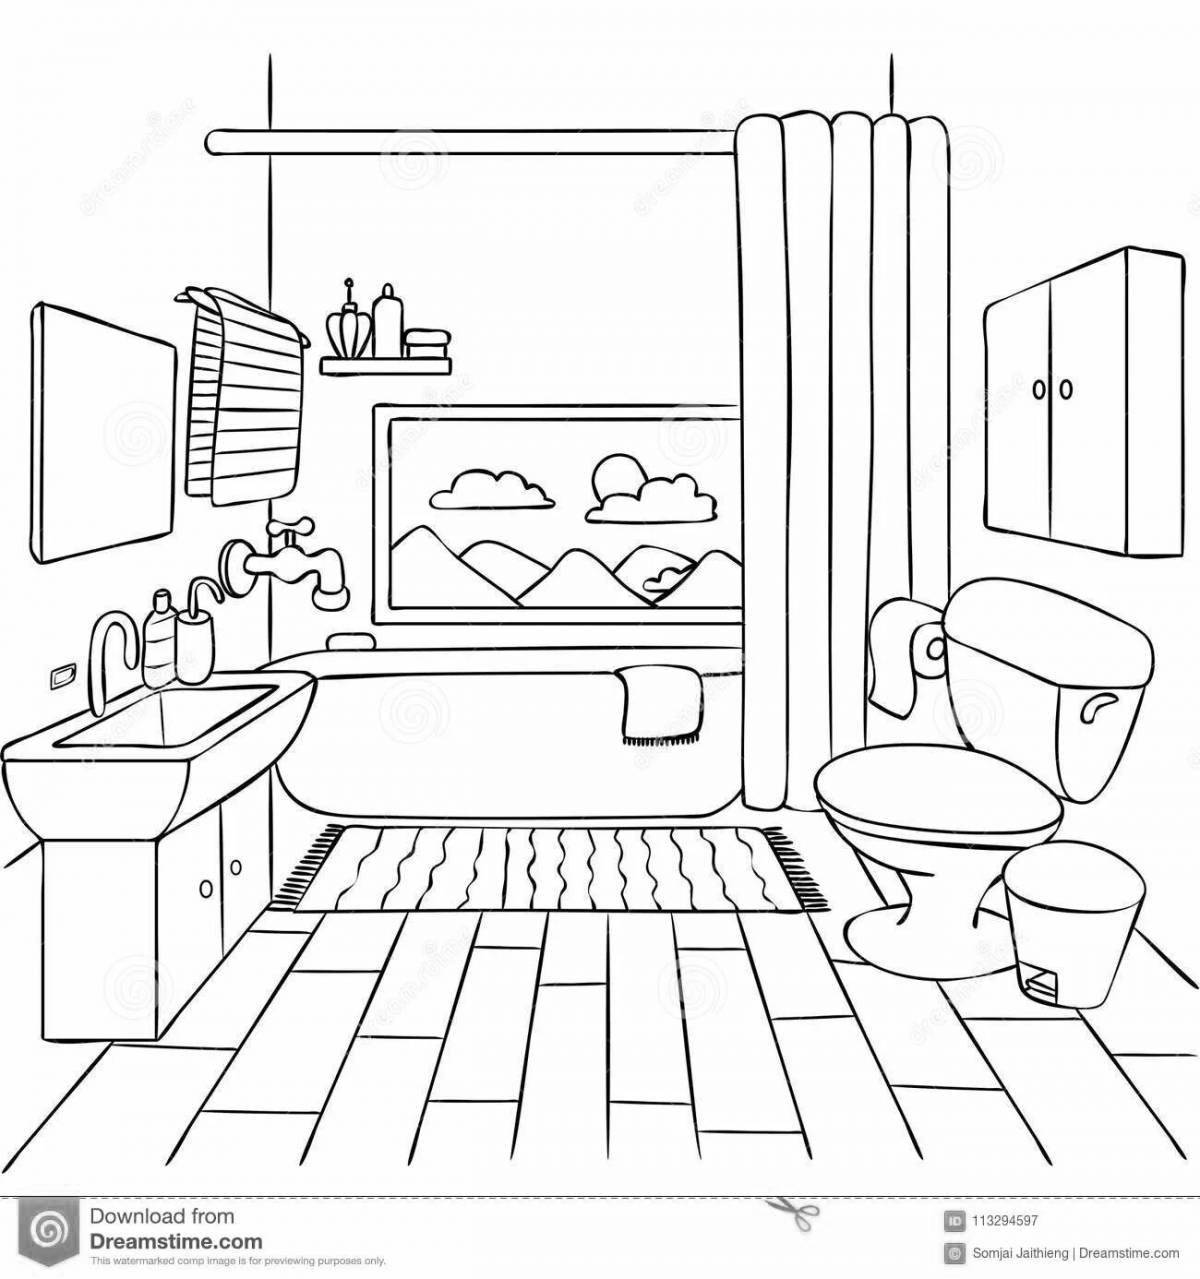 Playful bathroom coloring book for kids